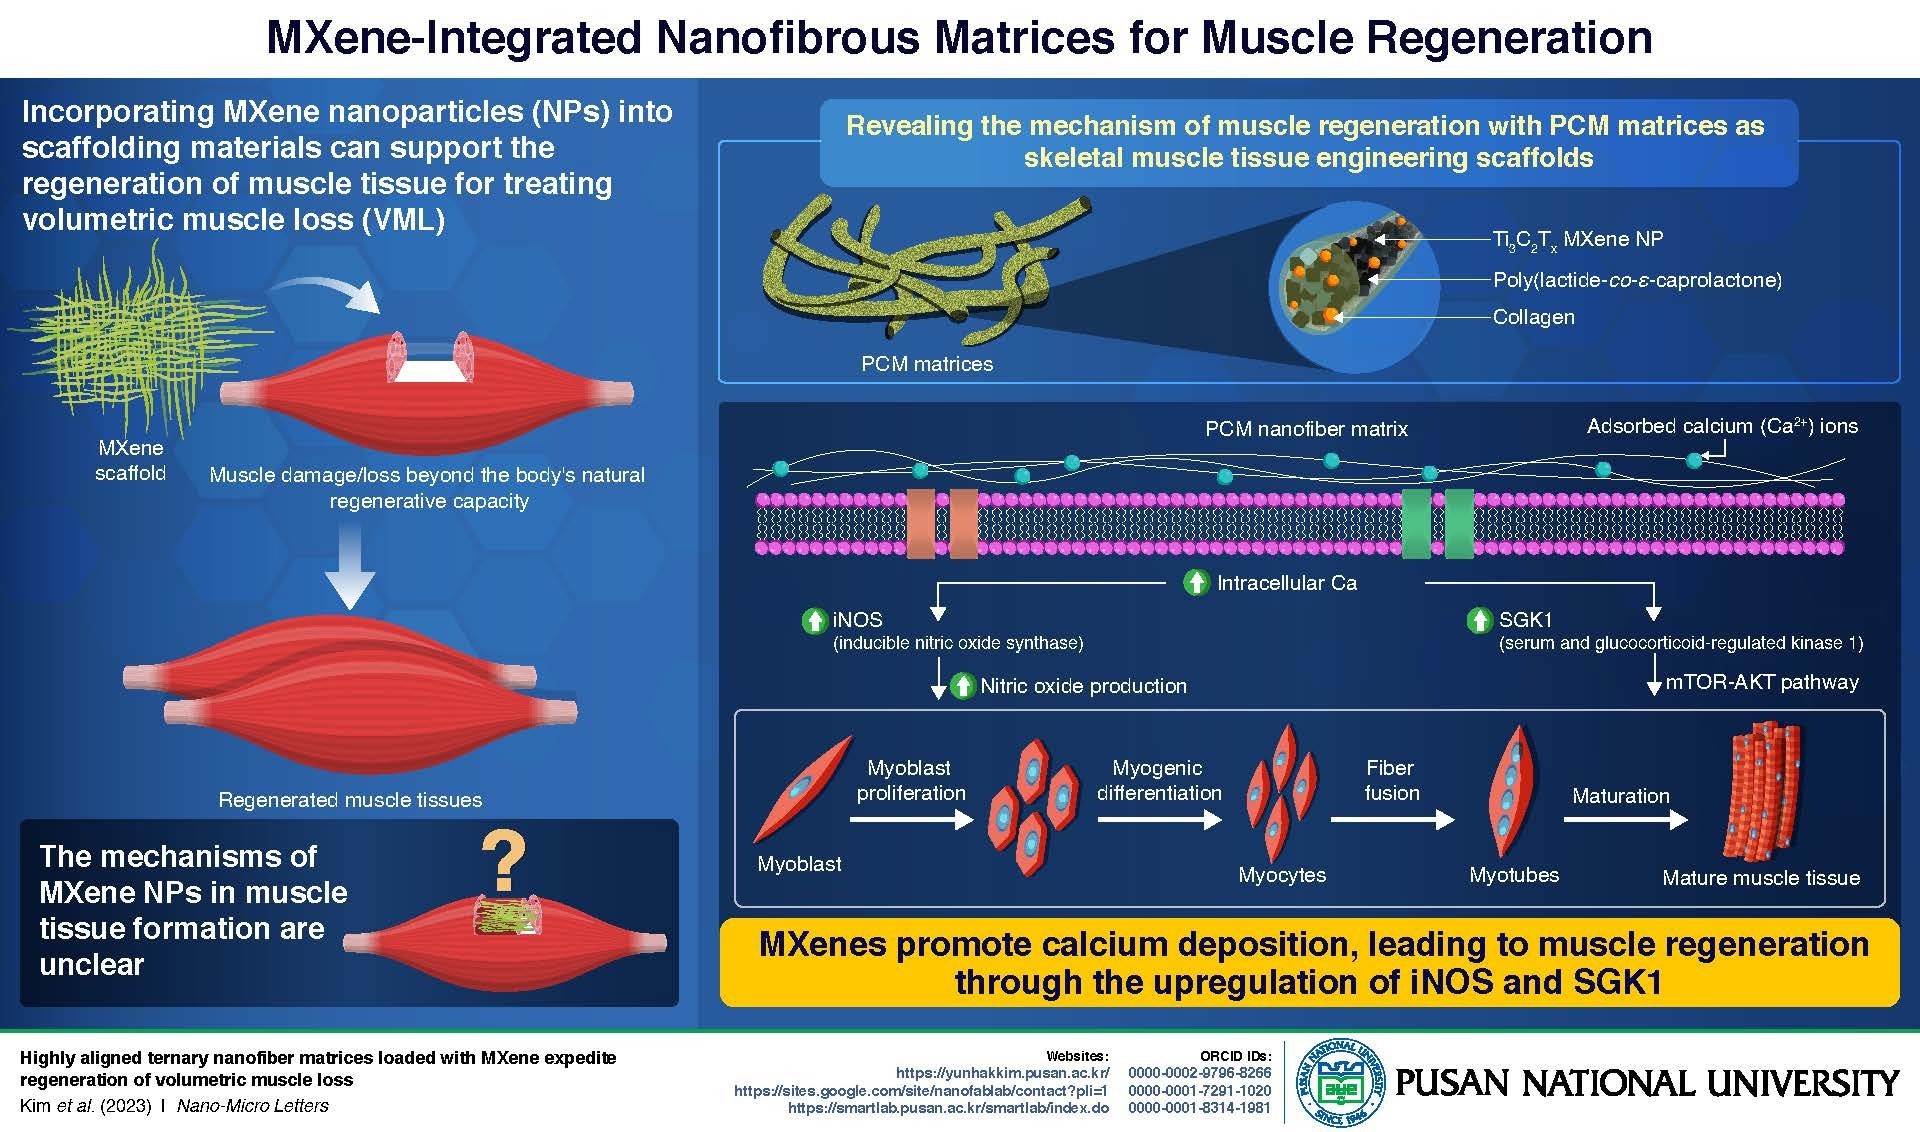 Pusan National University’s Breakthrough in Muscle Regeneration: Nanotech Scaffolding Supports Tissue Growth